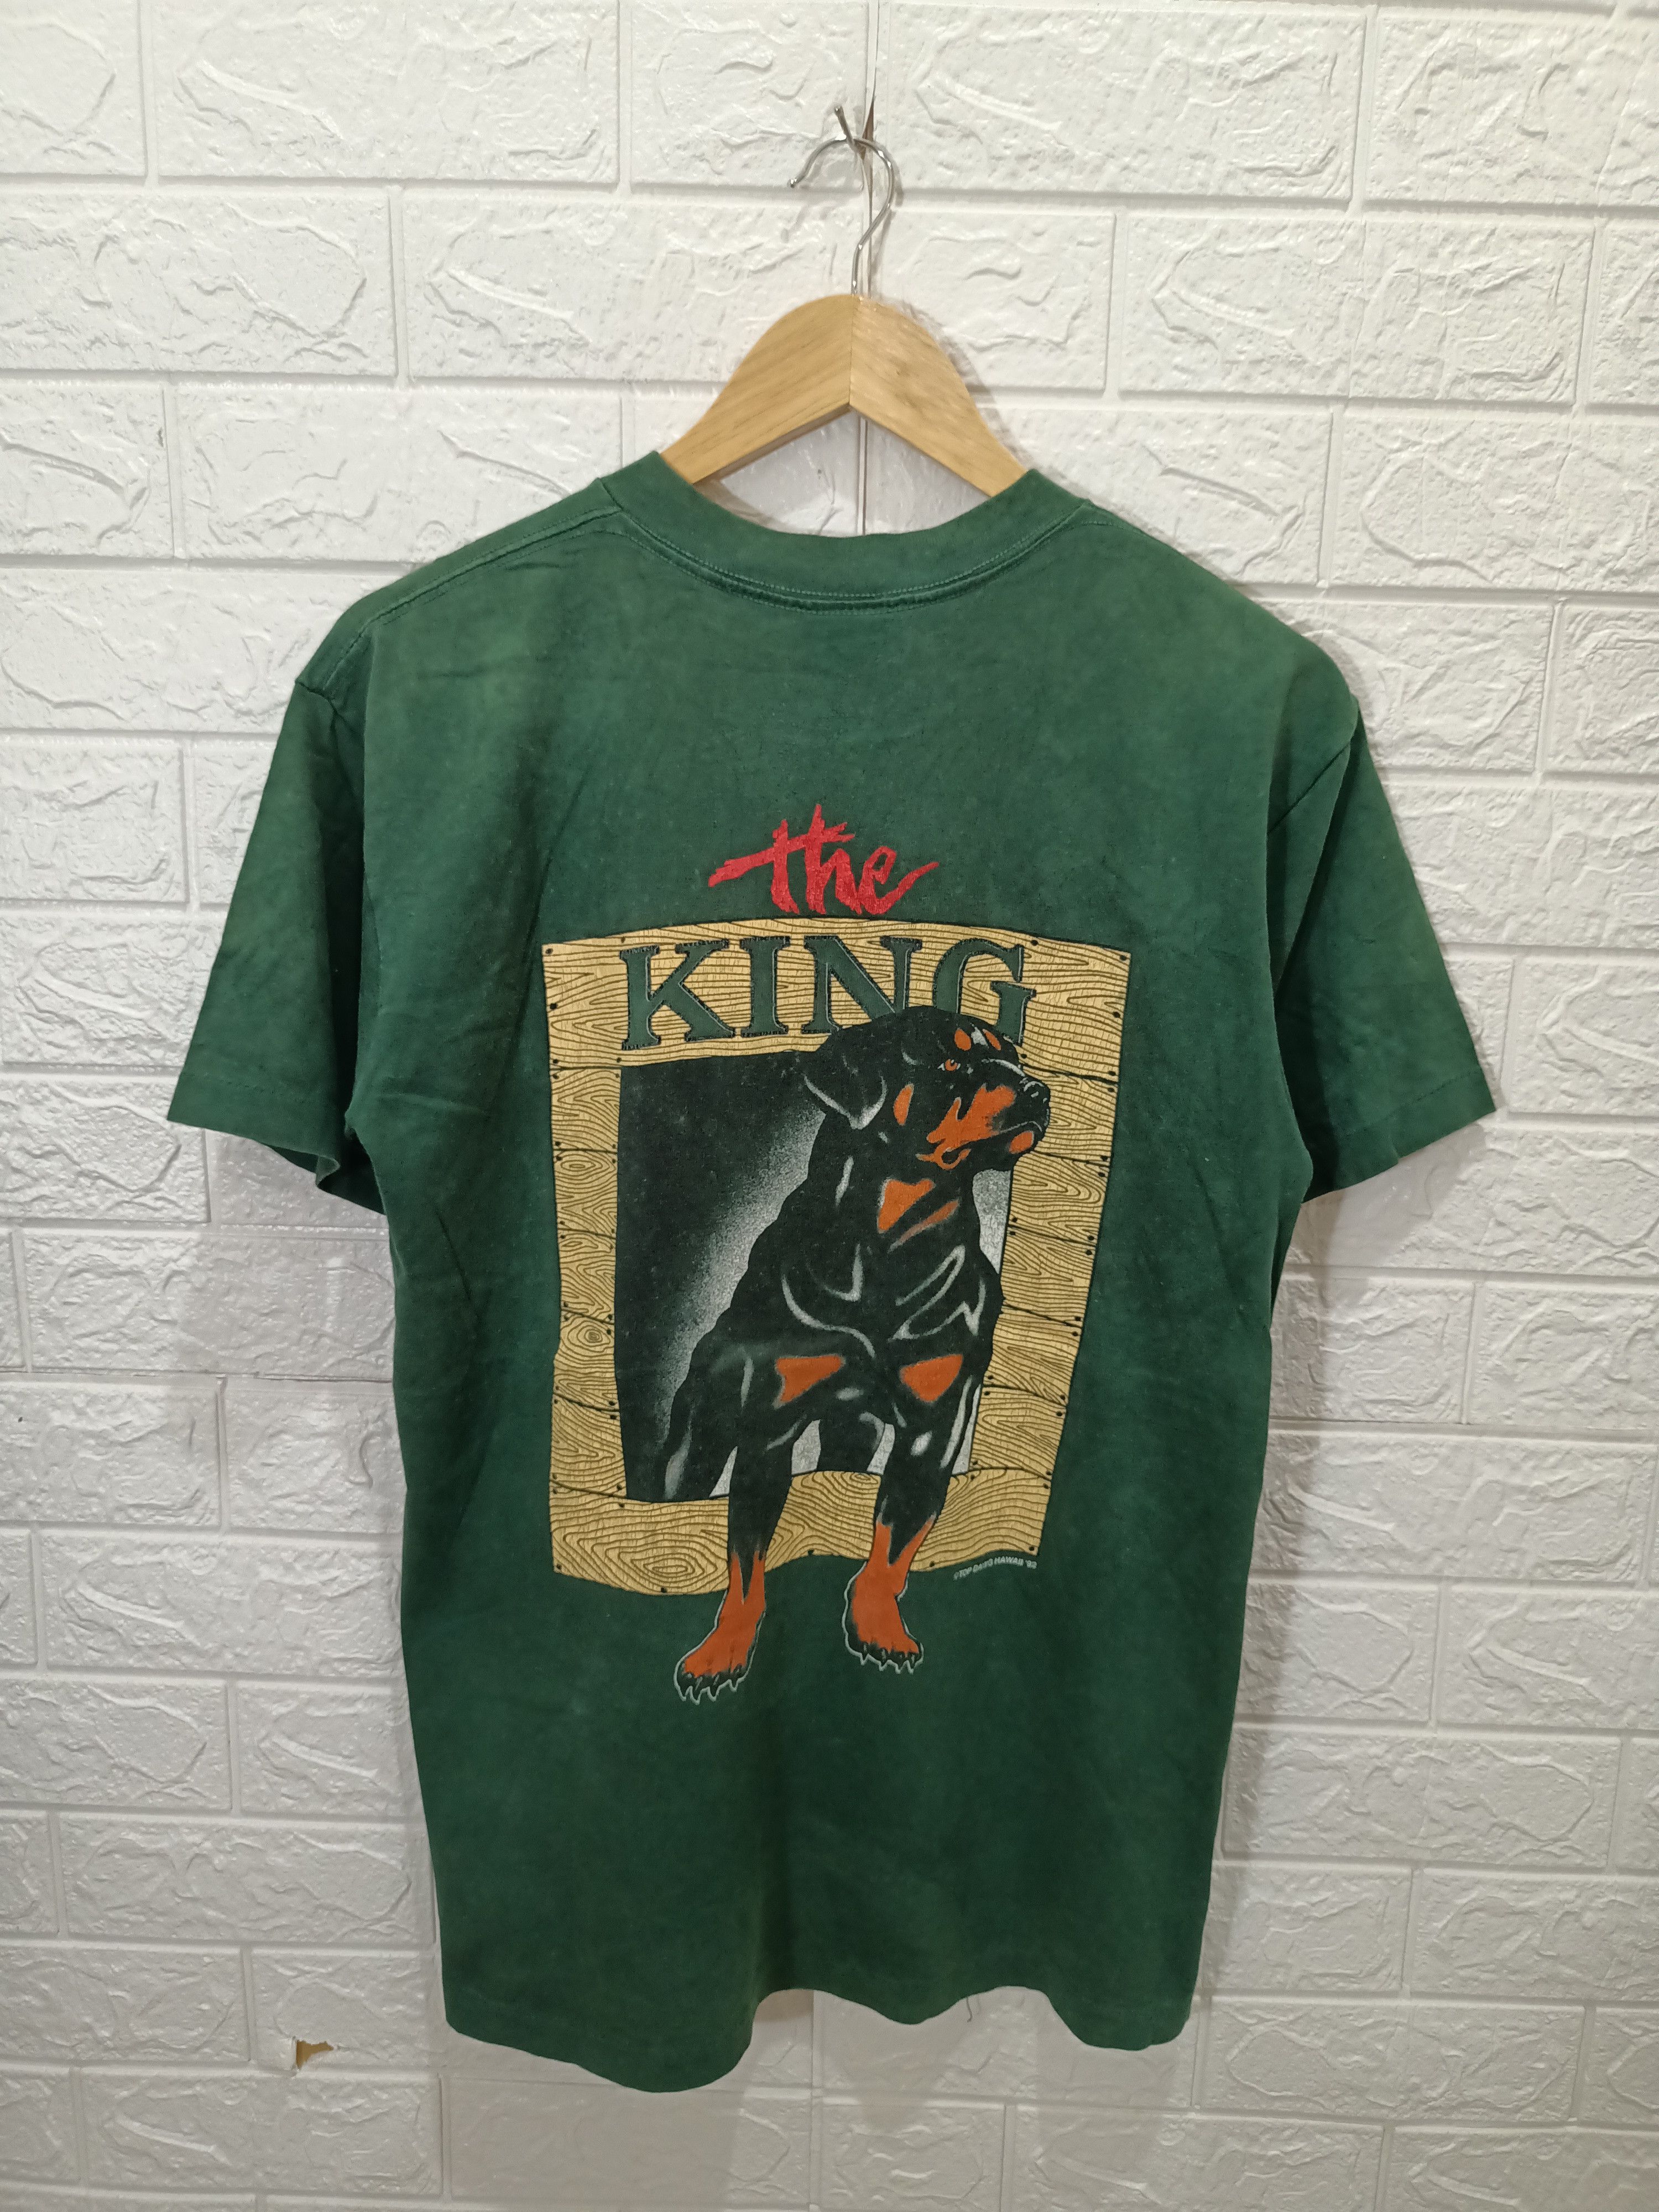 Rare Vintage 1992 The King Top Dawg Hawaii Graphic Tees - 3